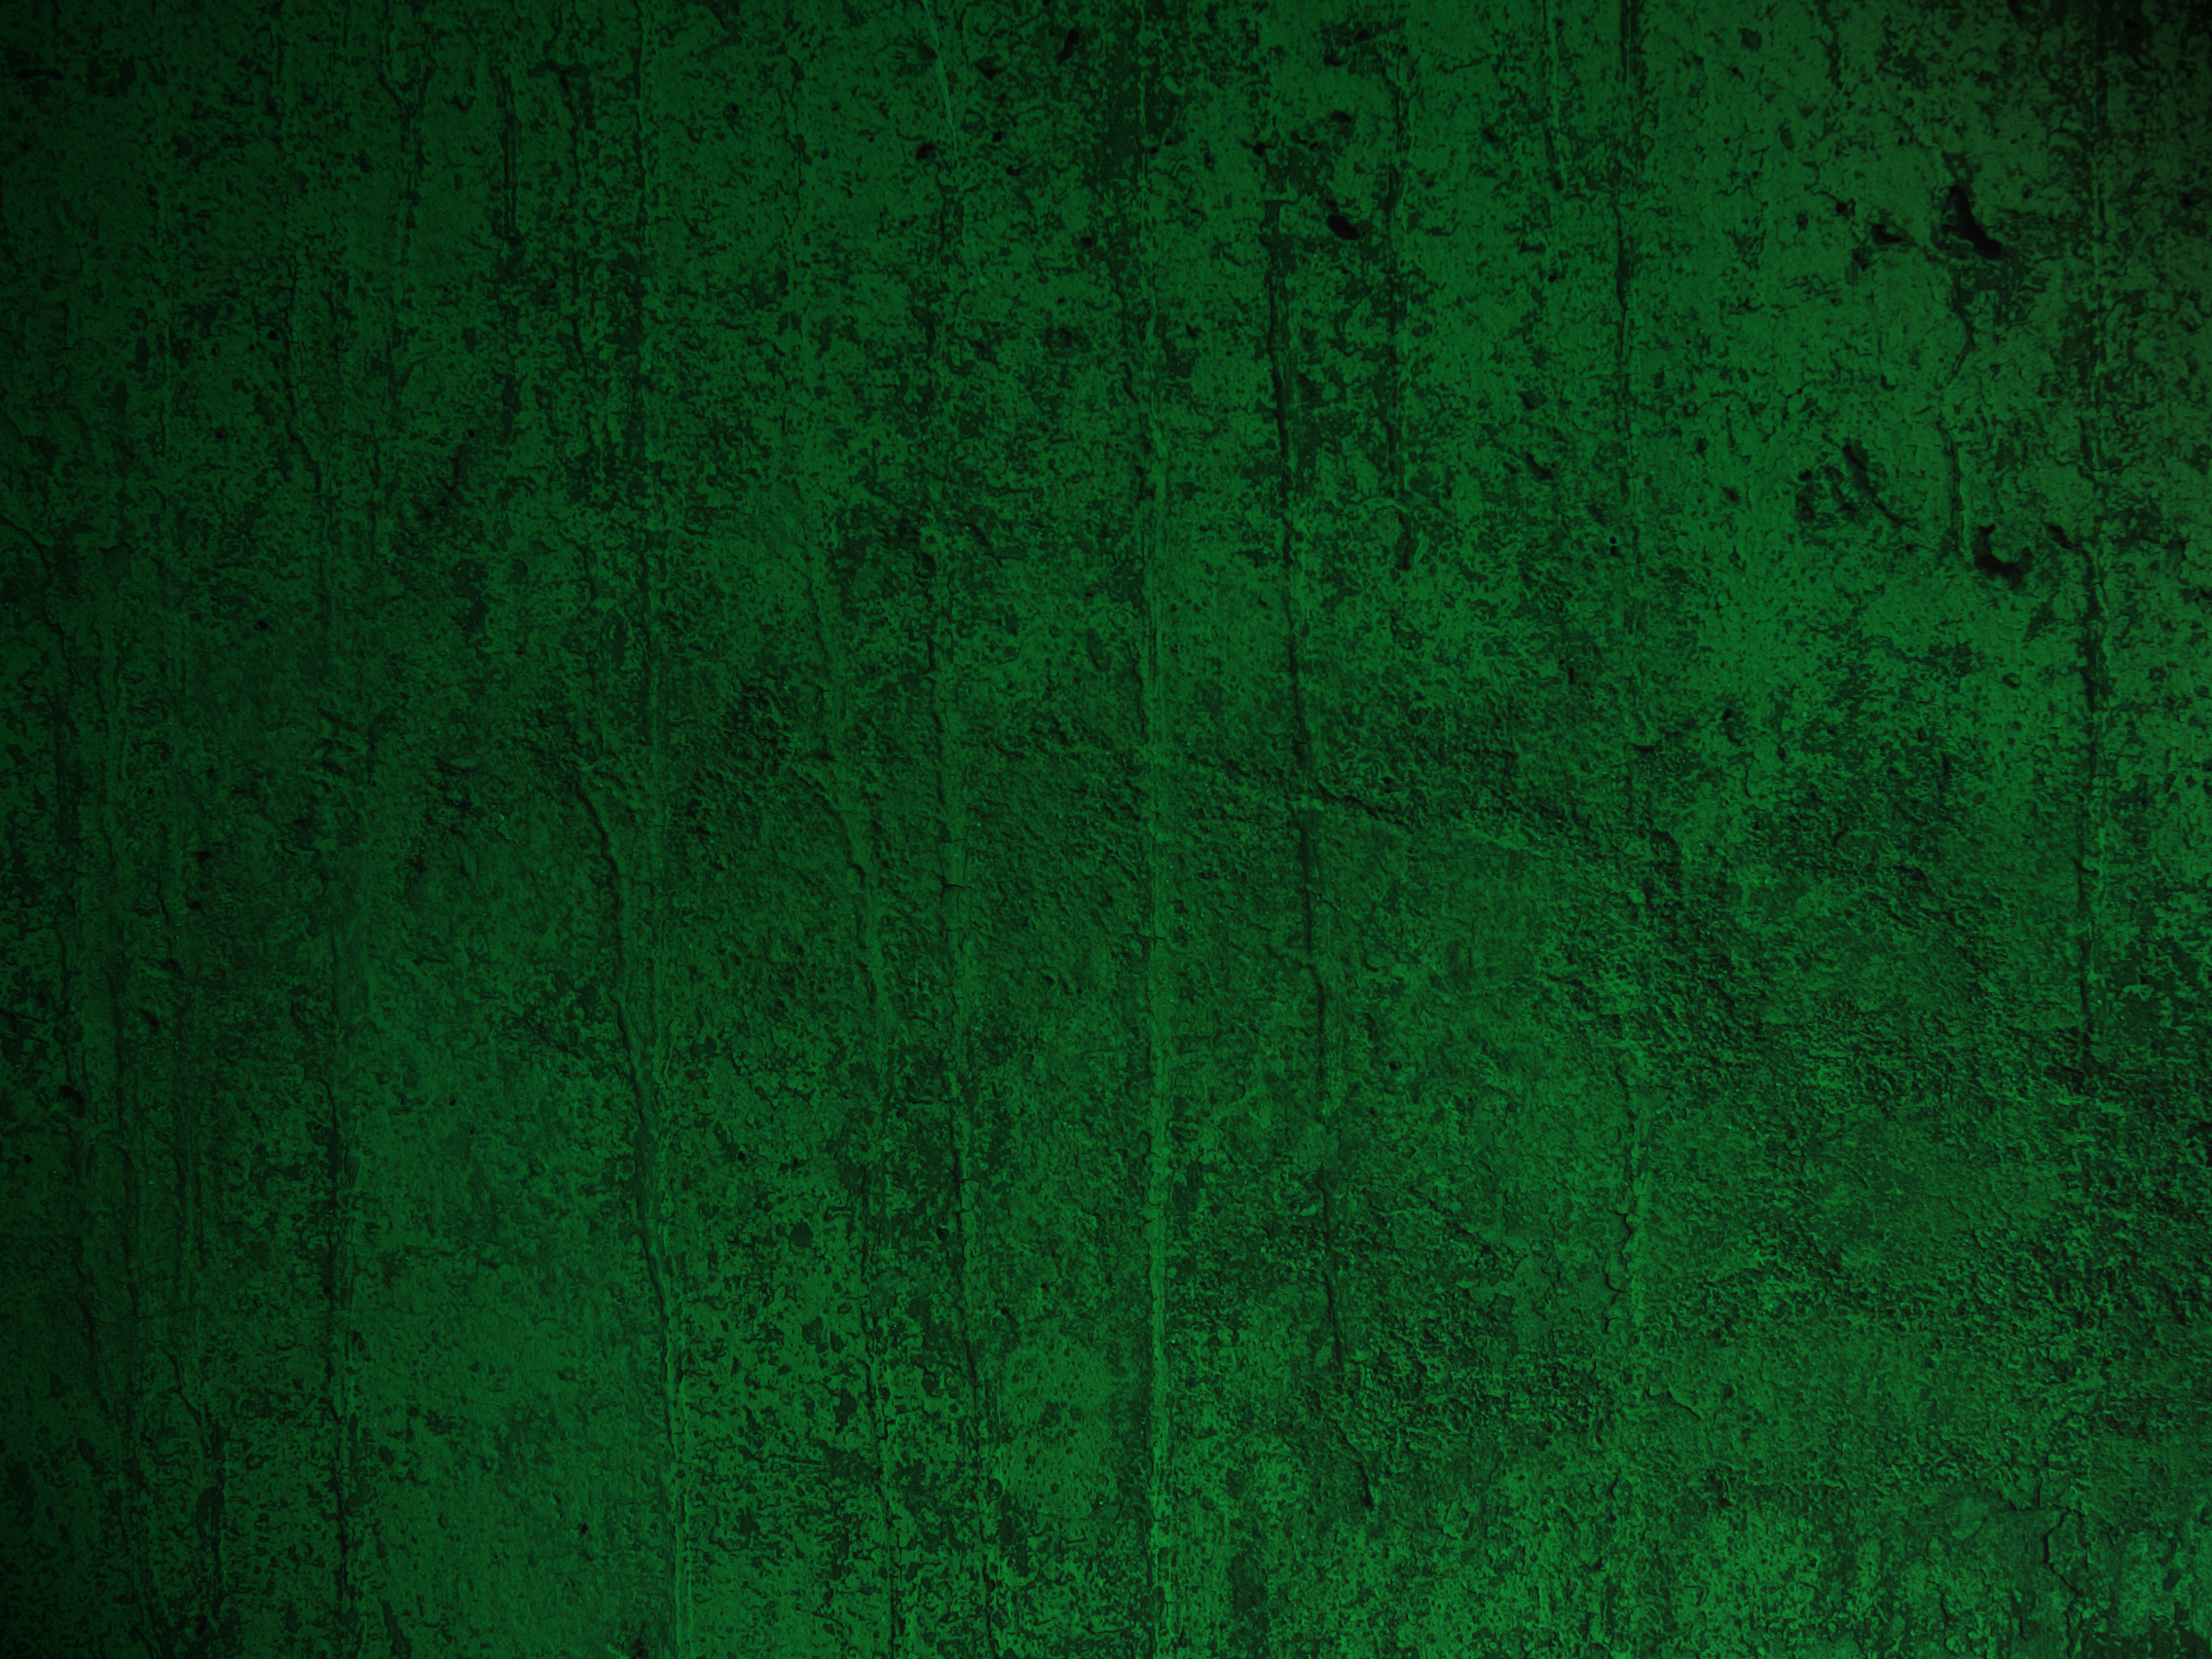 Green Textured Background HD Wallpaper On